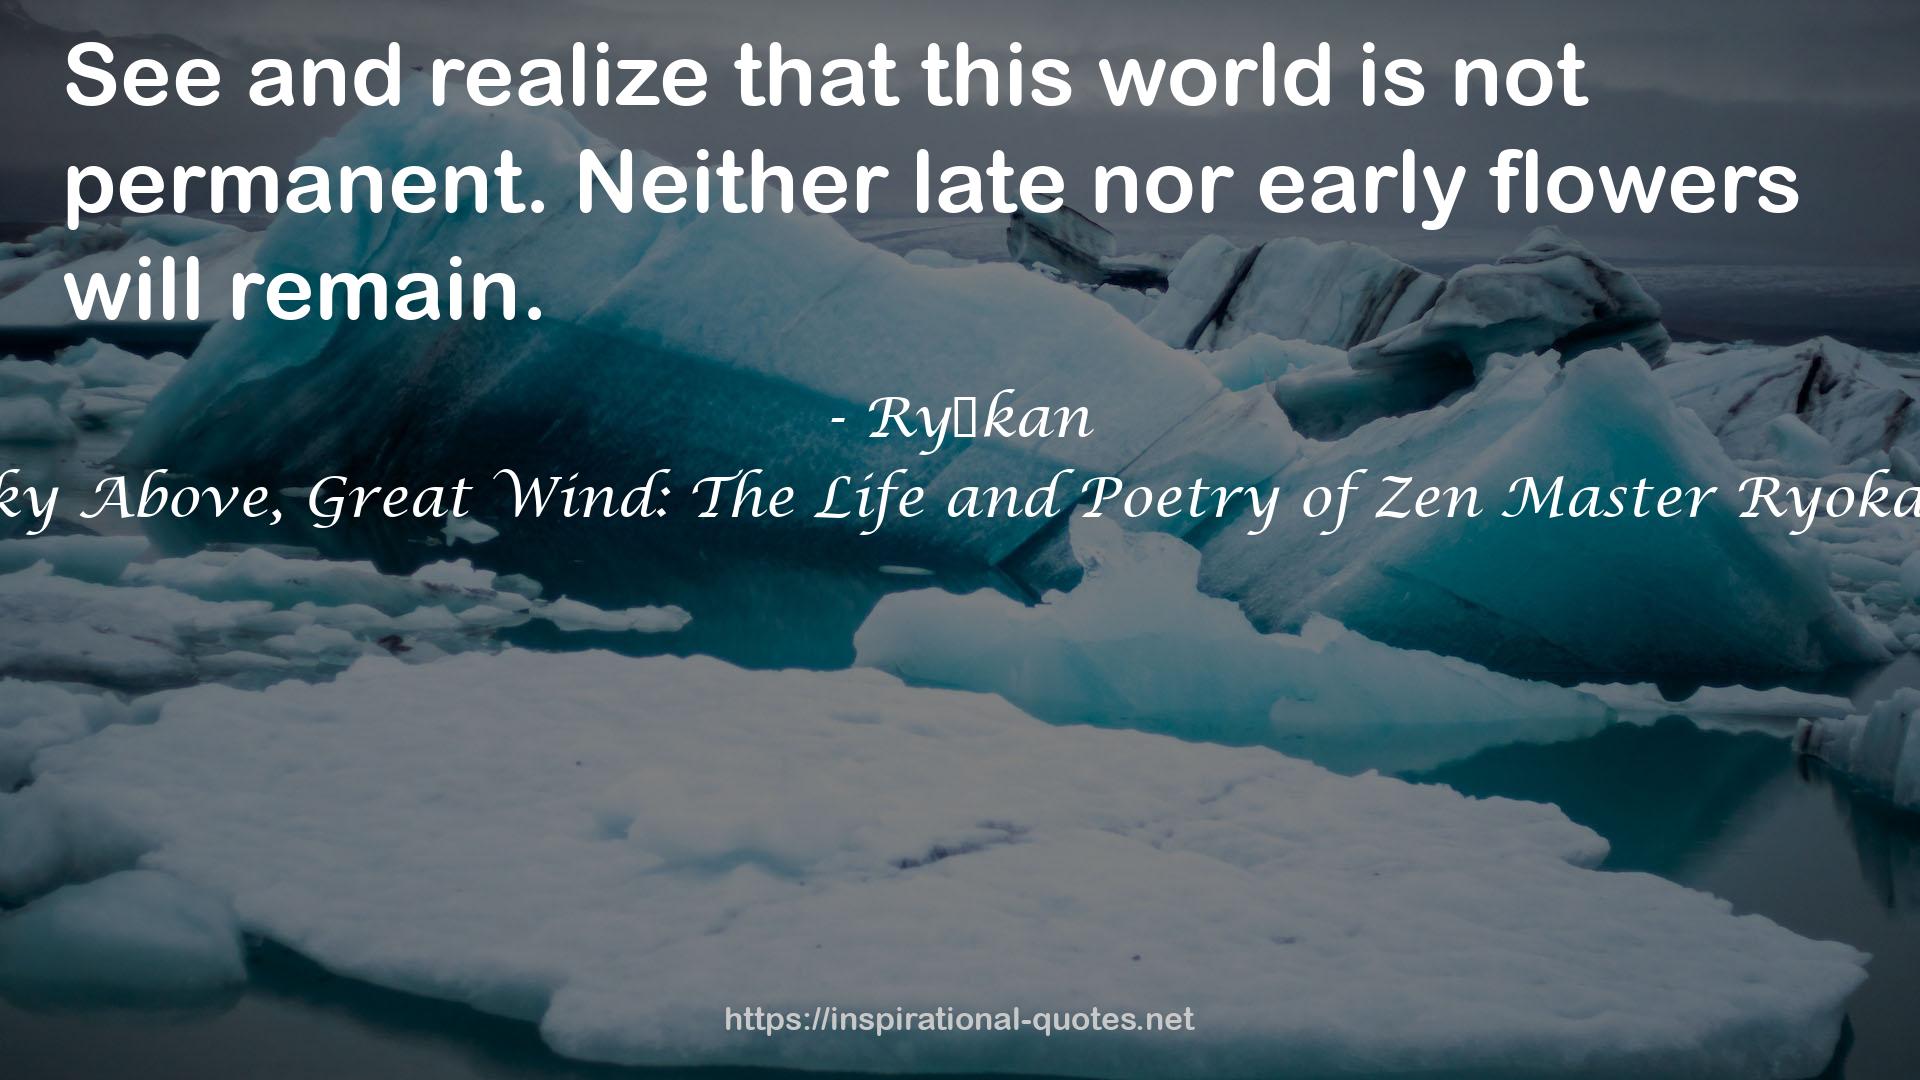 Sky Above, Great Wind: The Life and Poetry of Zen Master Ryokan QUOTES